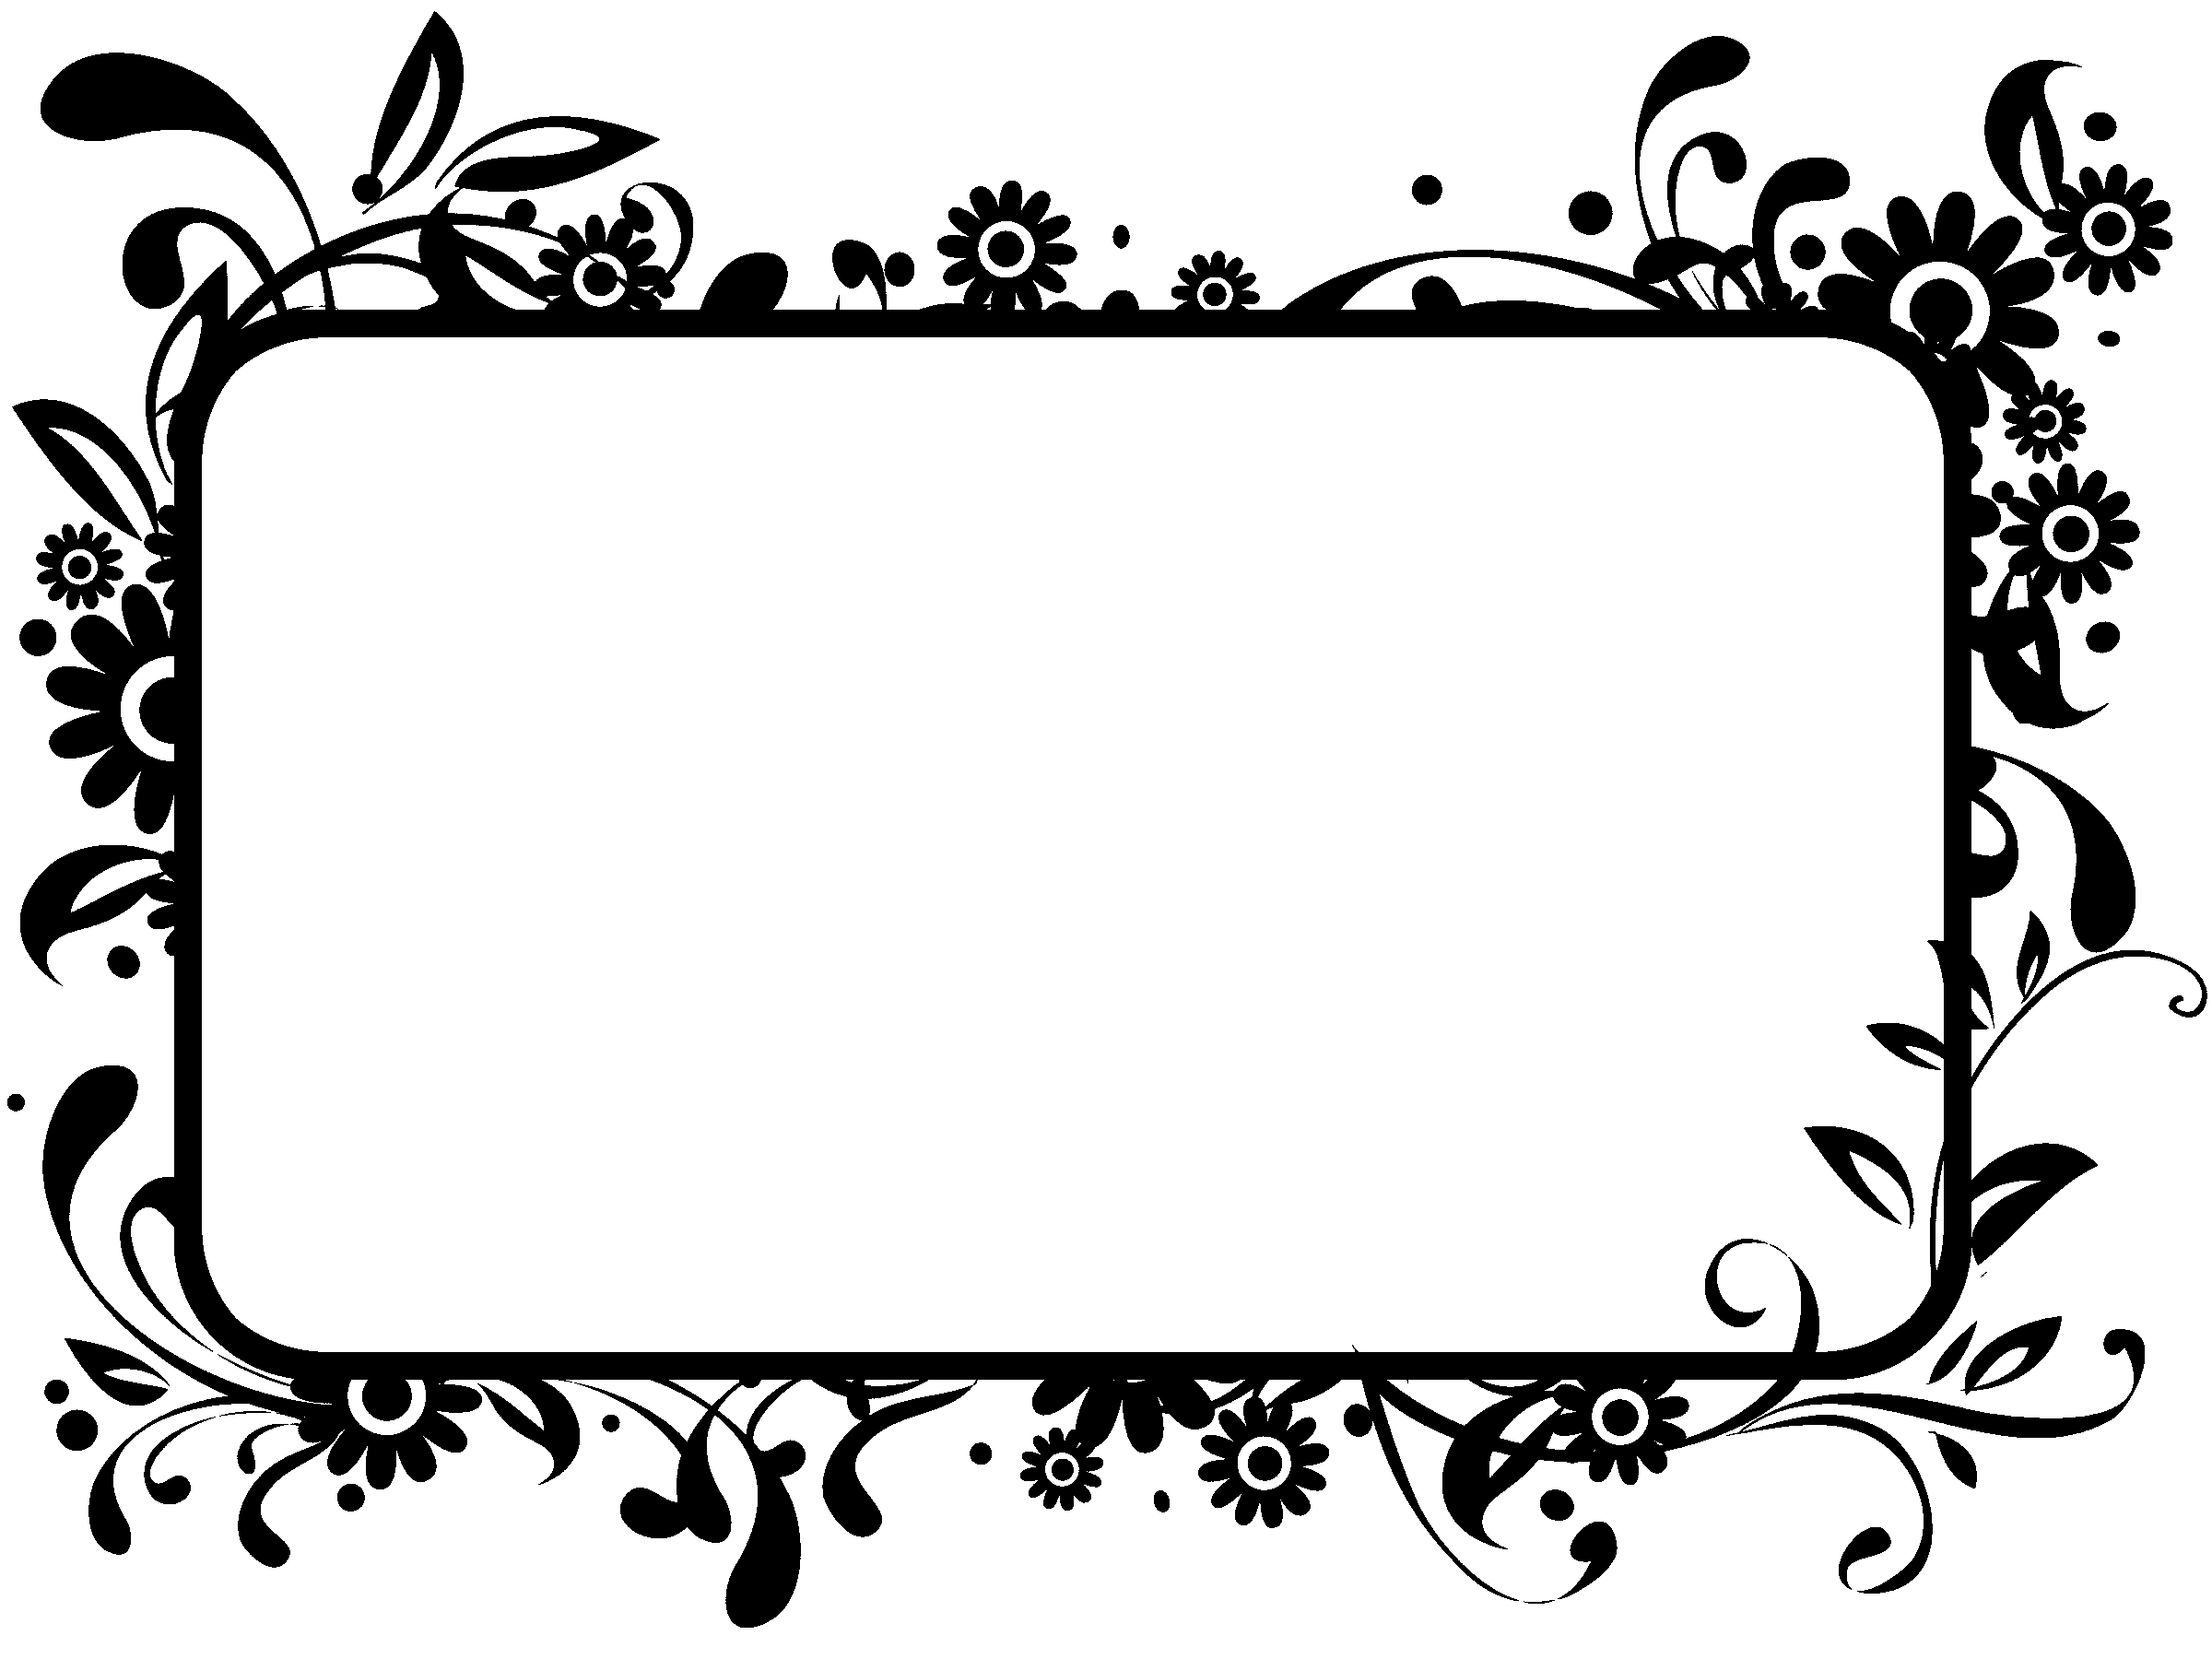 image clipart the wedding